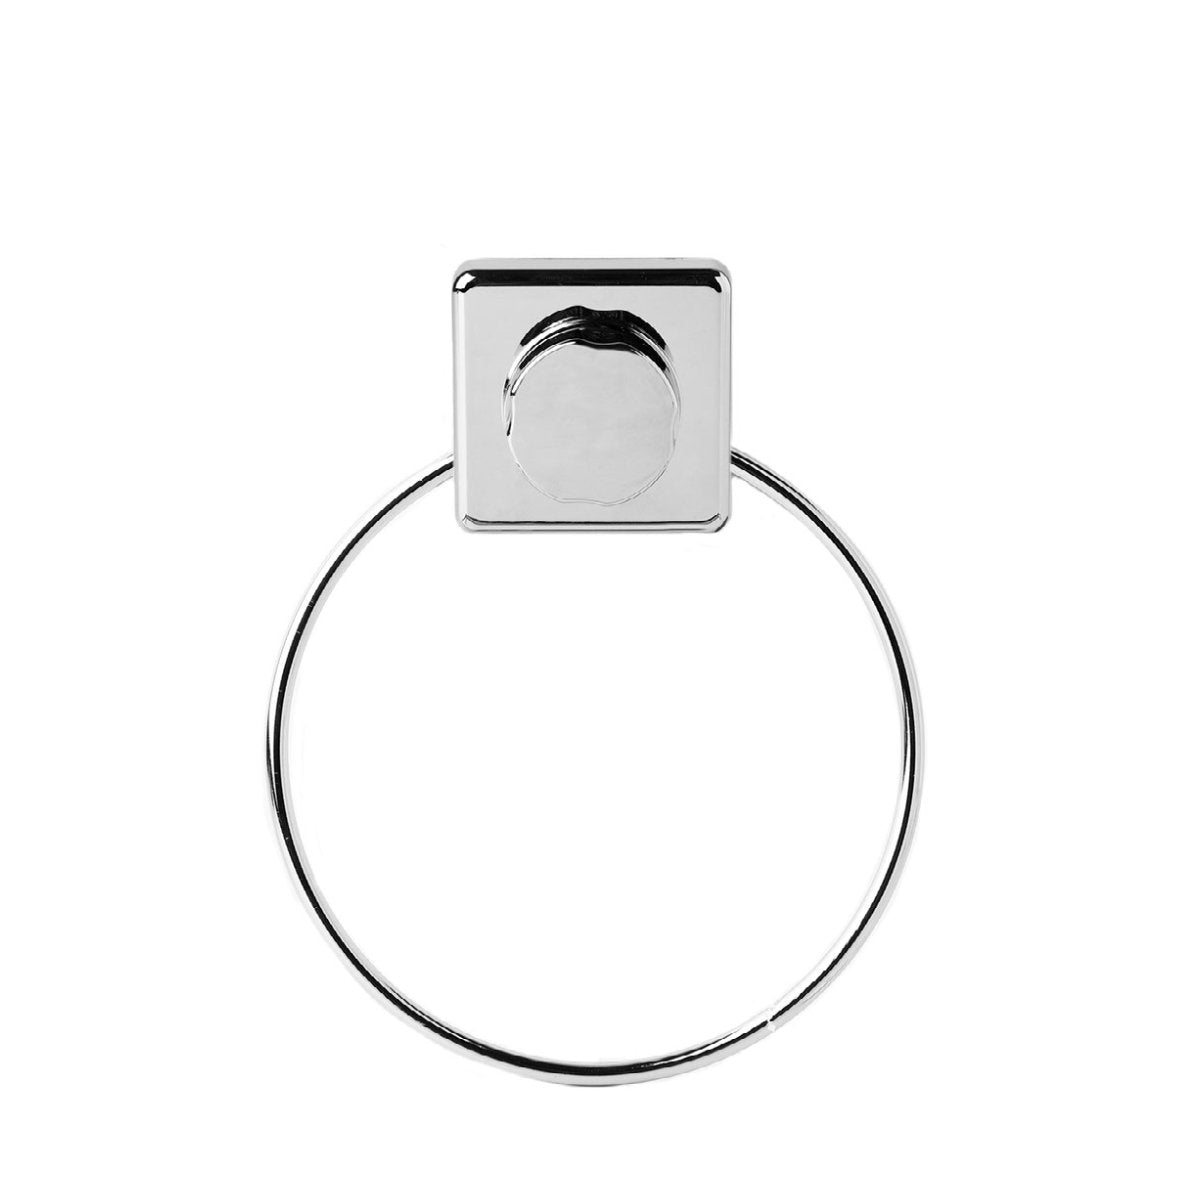 Suction and Screw Fix Towel Ring